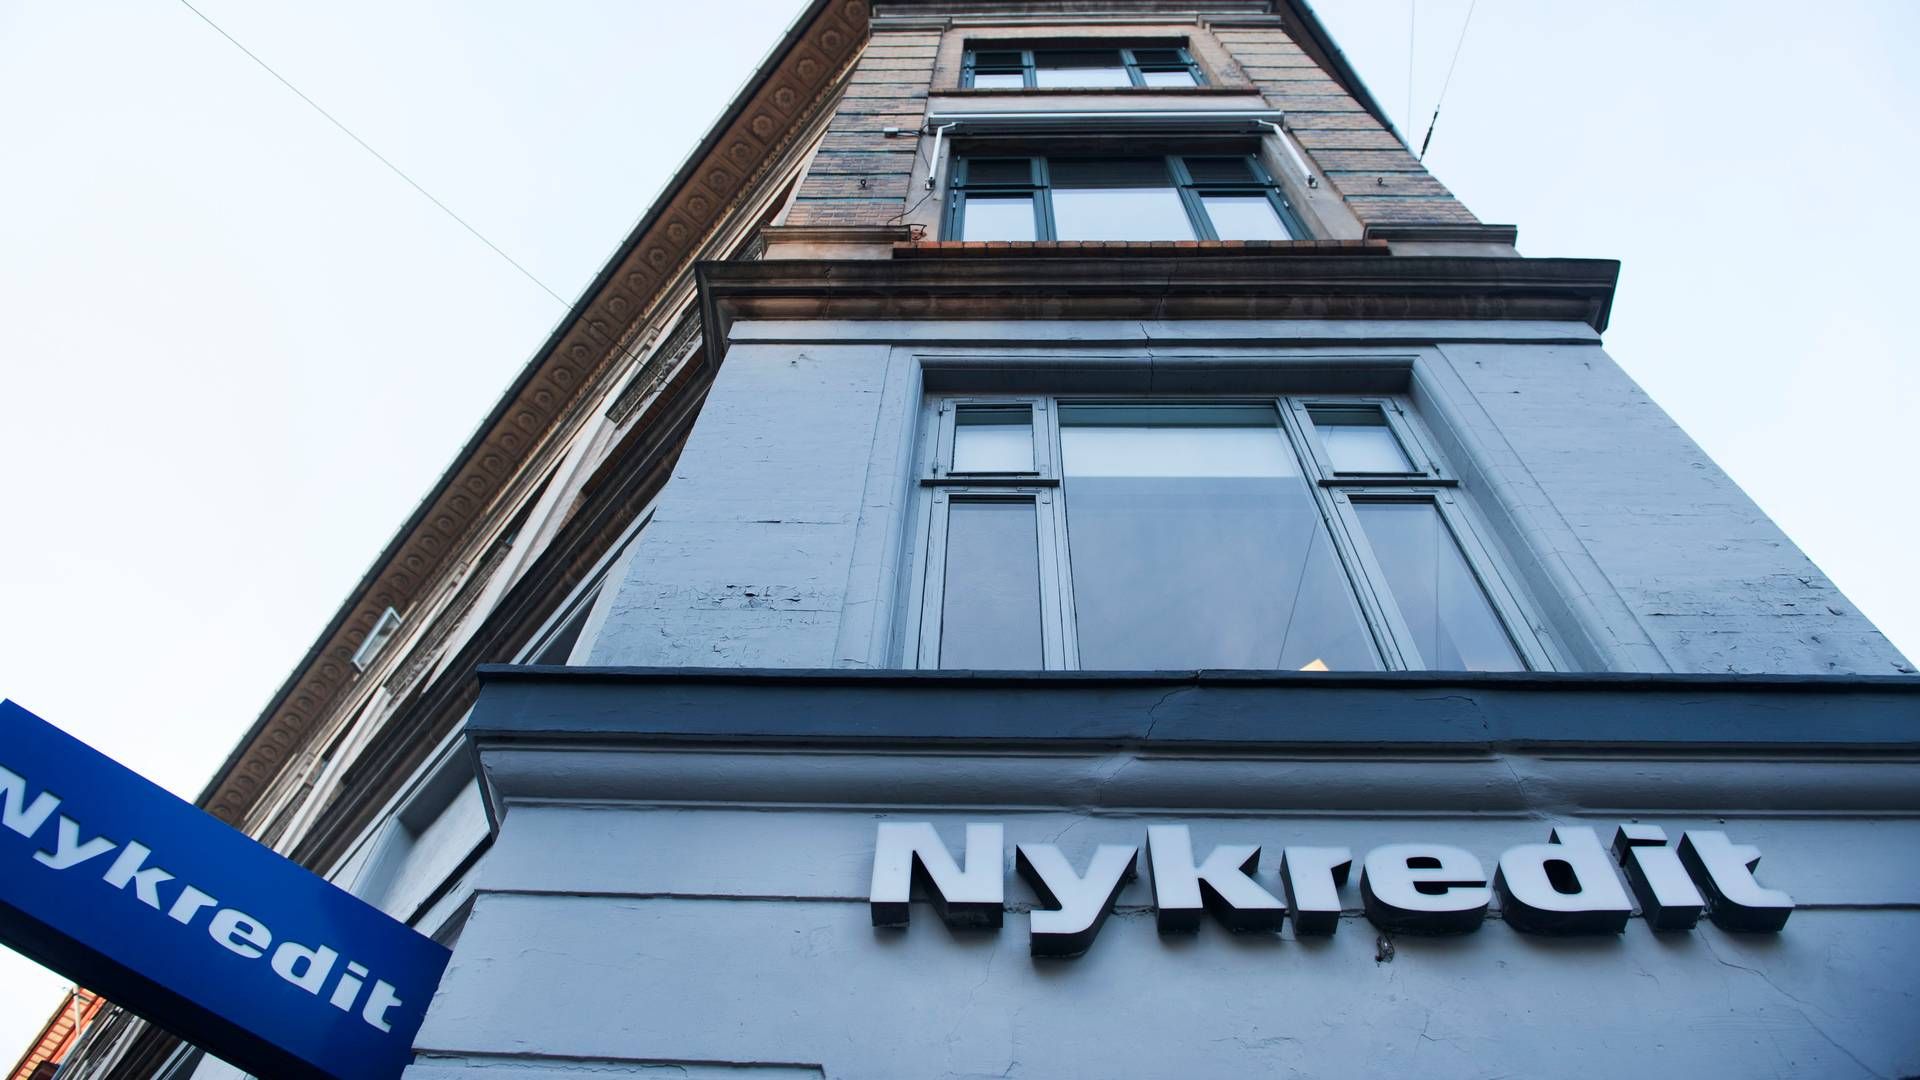 Nykredit has launched a new solution for customers who have invested through the bank. | Photo: Olivia Loftlund